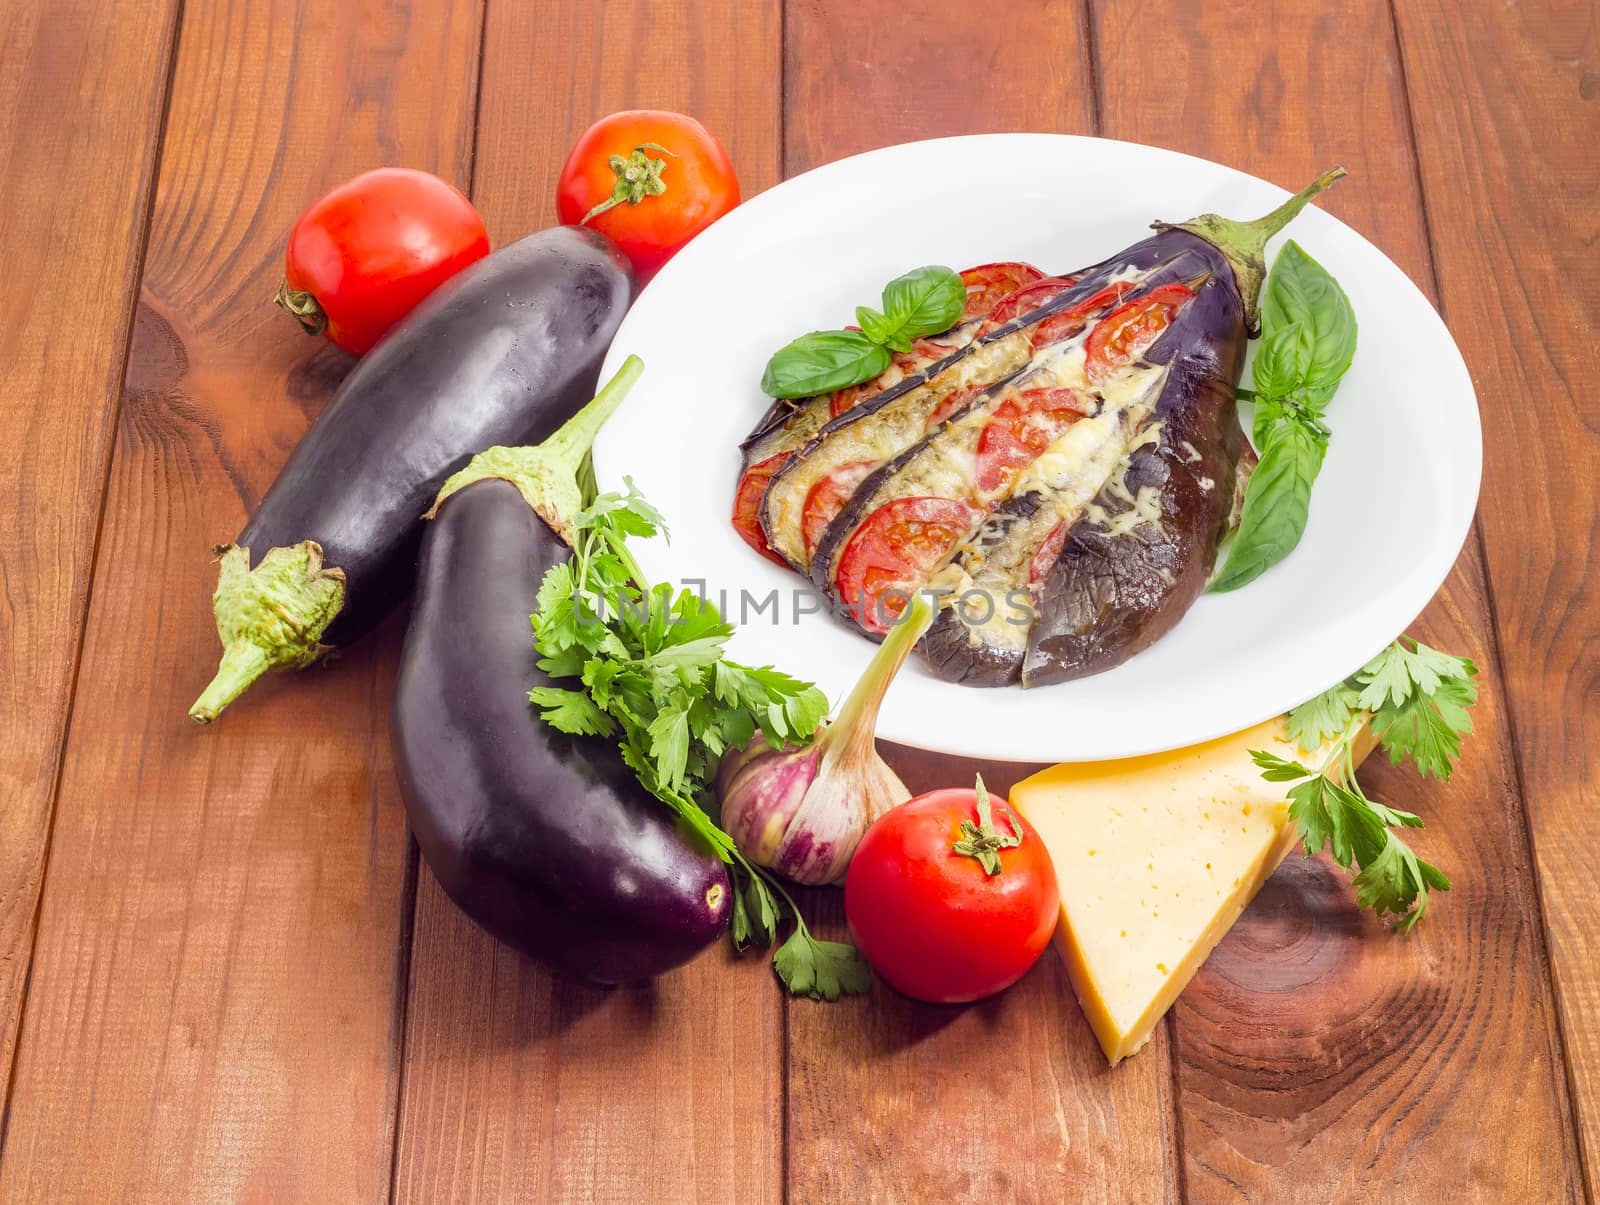 Baked eggplant stuffed with vegetables and cheese decorated with basil leaves on white dish and ingredients for its cooking beside on a surface of a dark wooden planks
